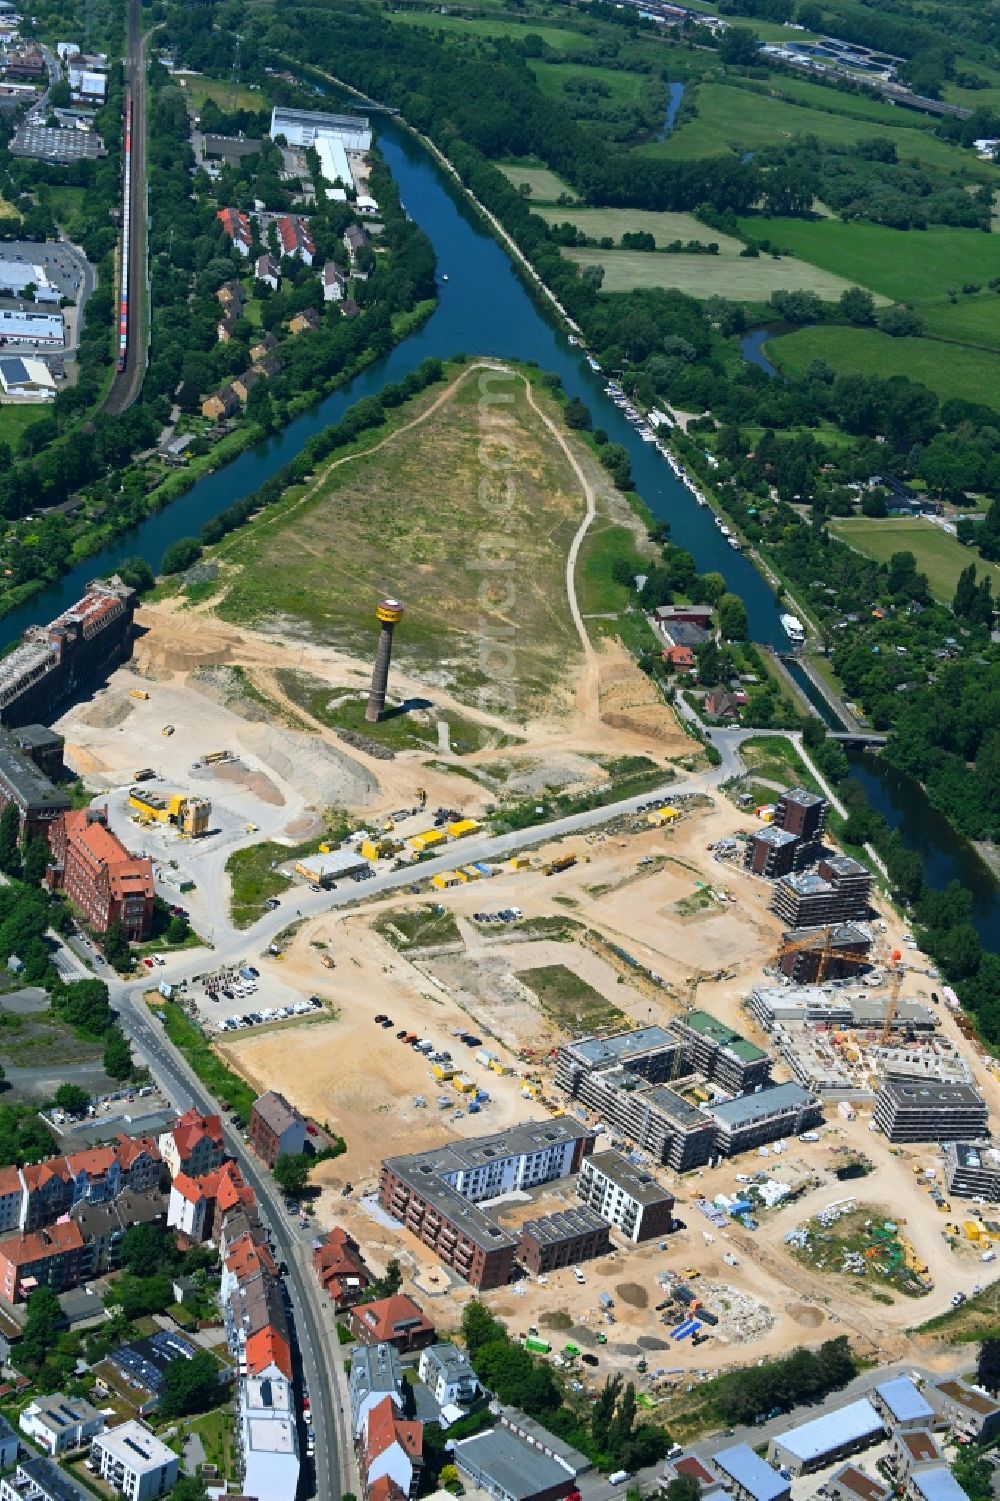 Hannover from the bird's eye view: Construction site to build a new multi-family residential complex Wasserstadt Limmer in the district Limmer in Hannover in the state Lower Saxony, Germany